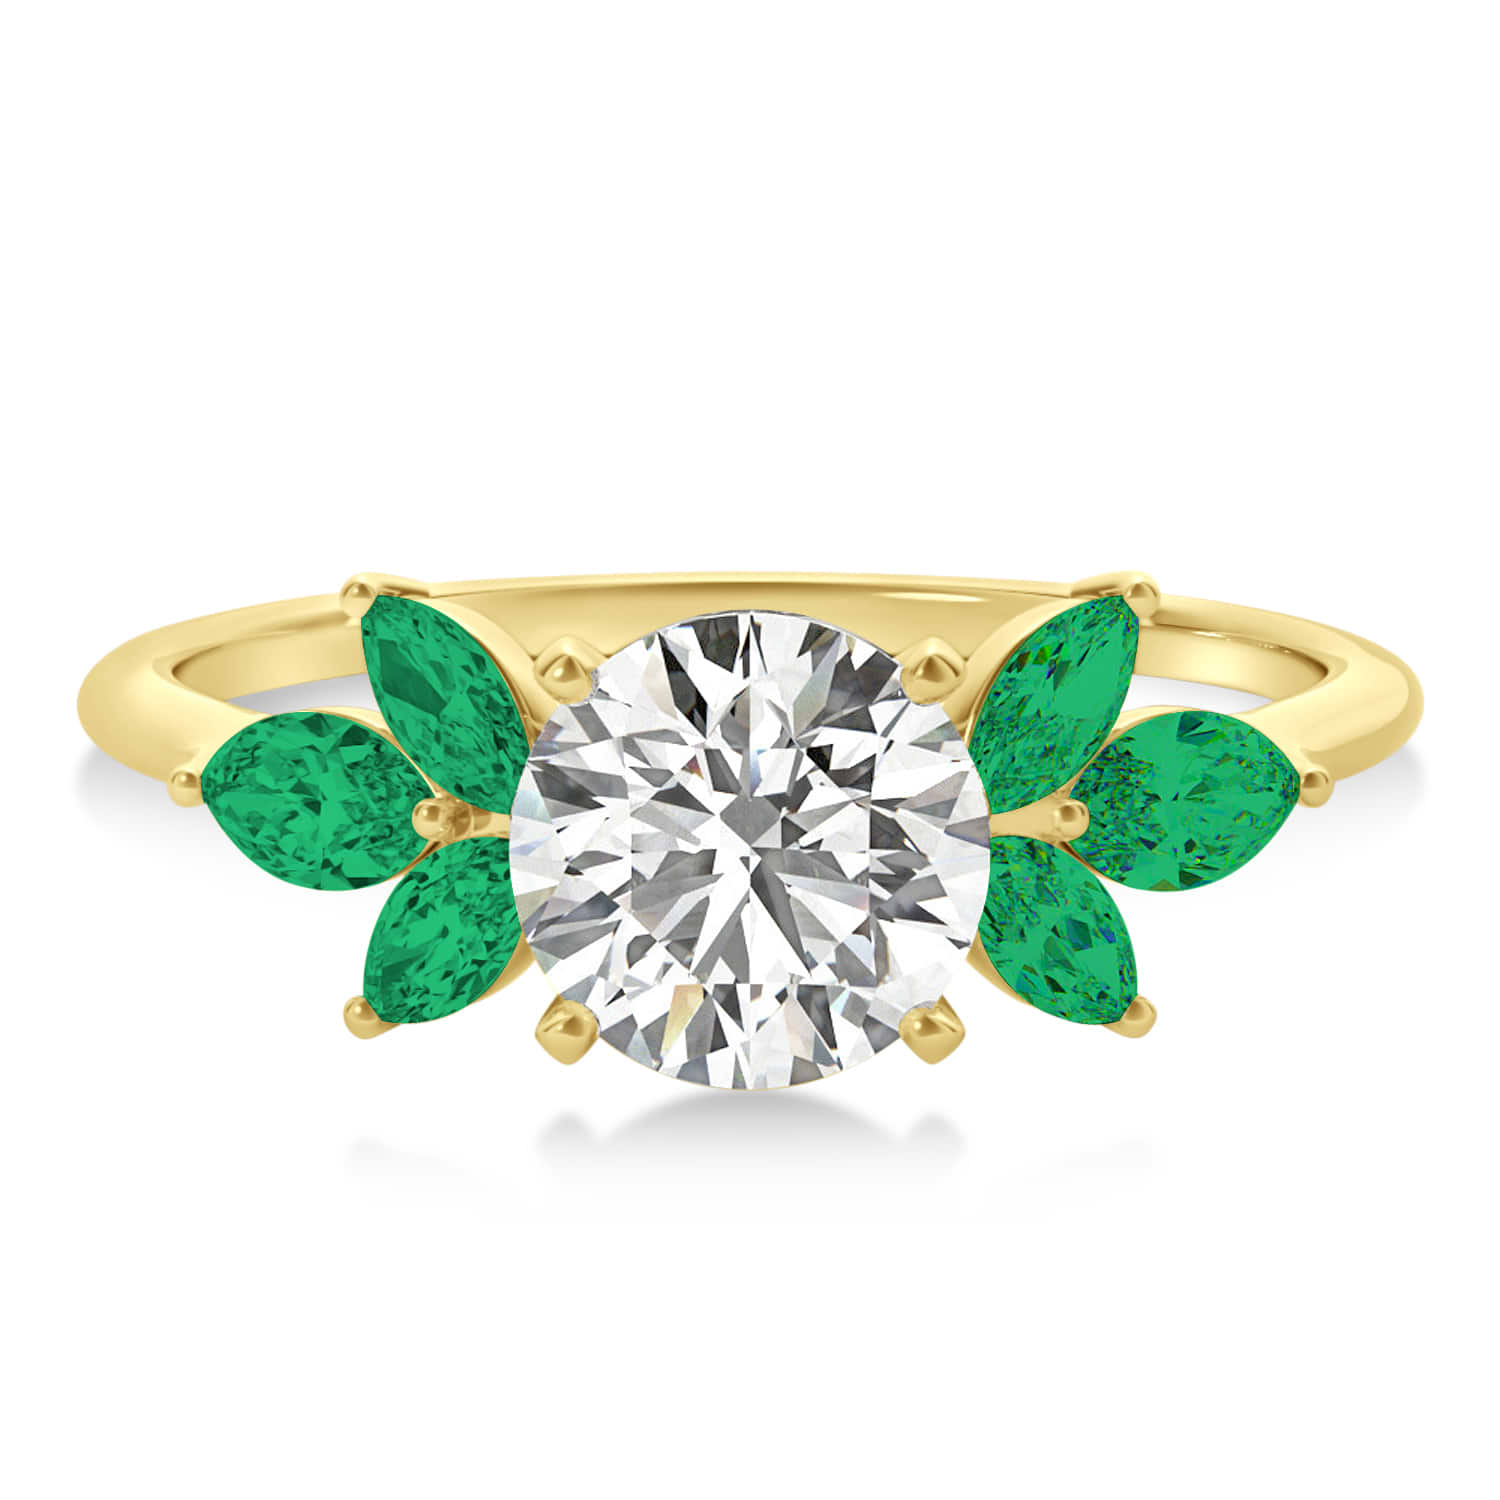 Emerald Marquise Floral Engagement Ring 14k Yellow Gold (0.50ct)